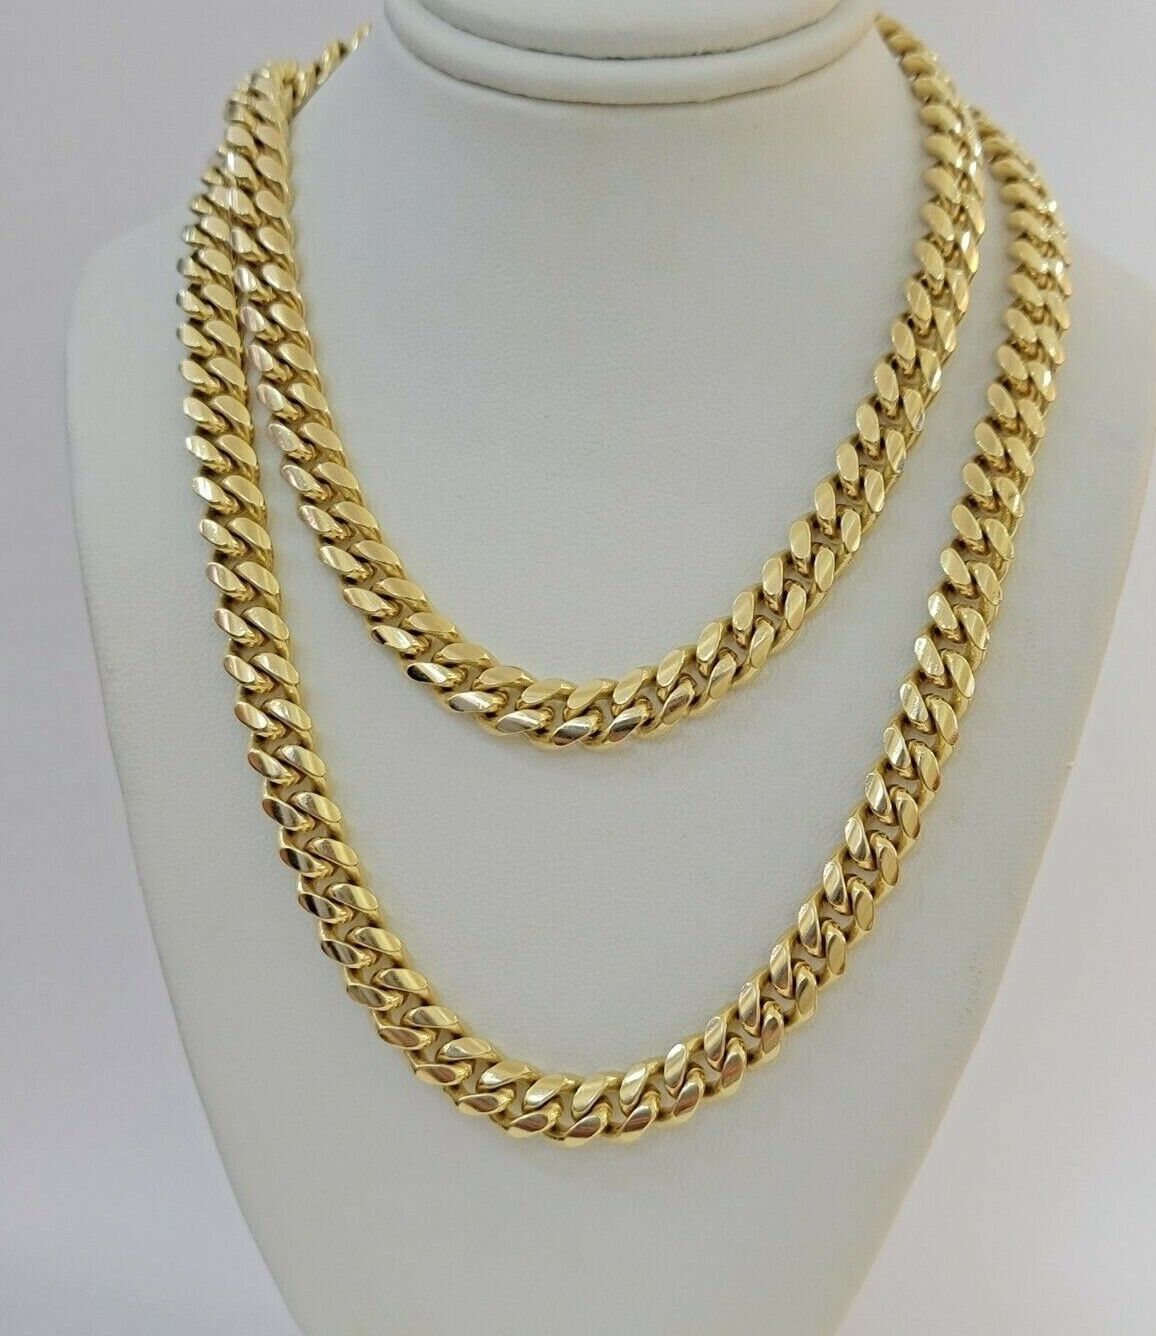 Real 14k Yellow Gold Chain Solid Miami Cuban Link Chain Necklace 18